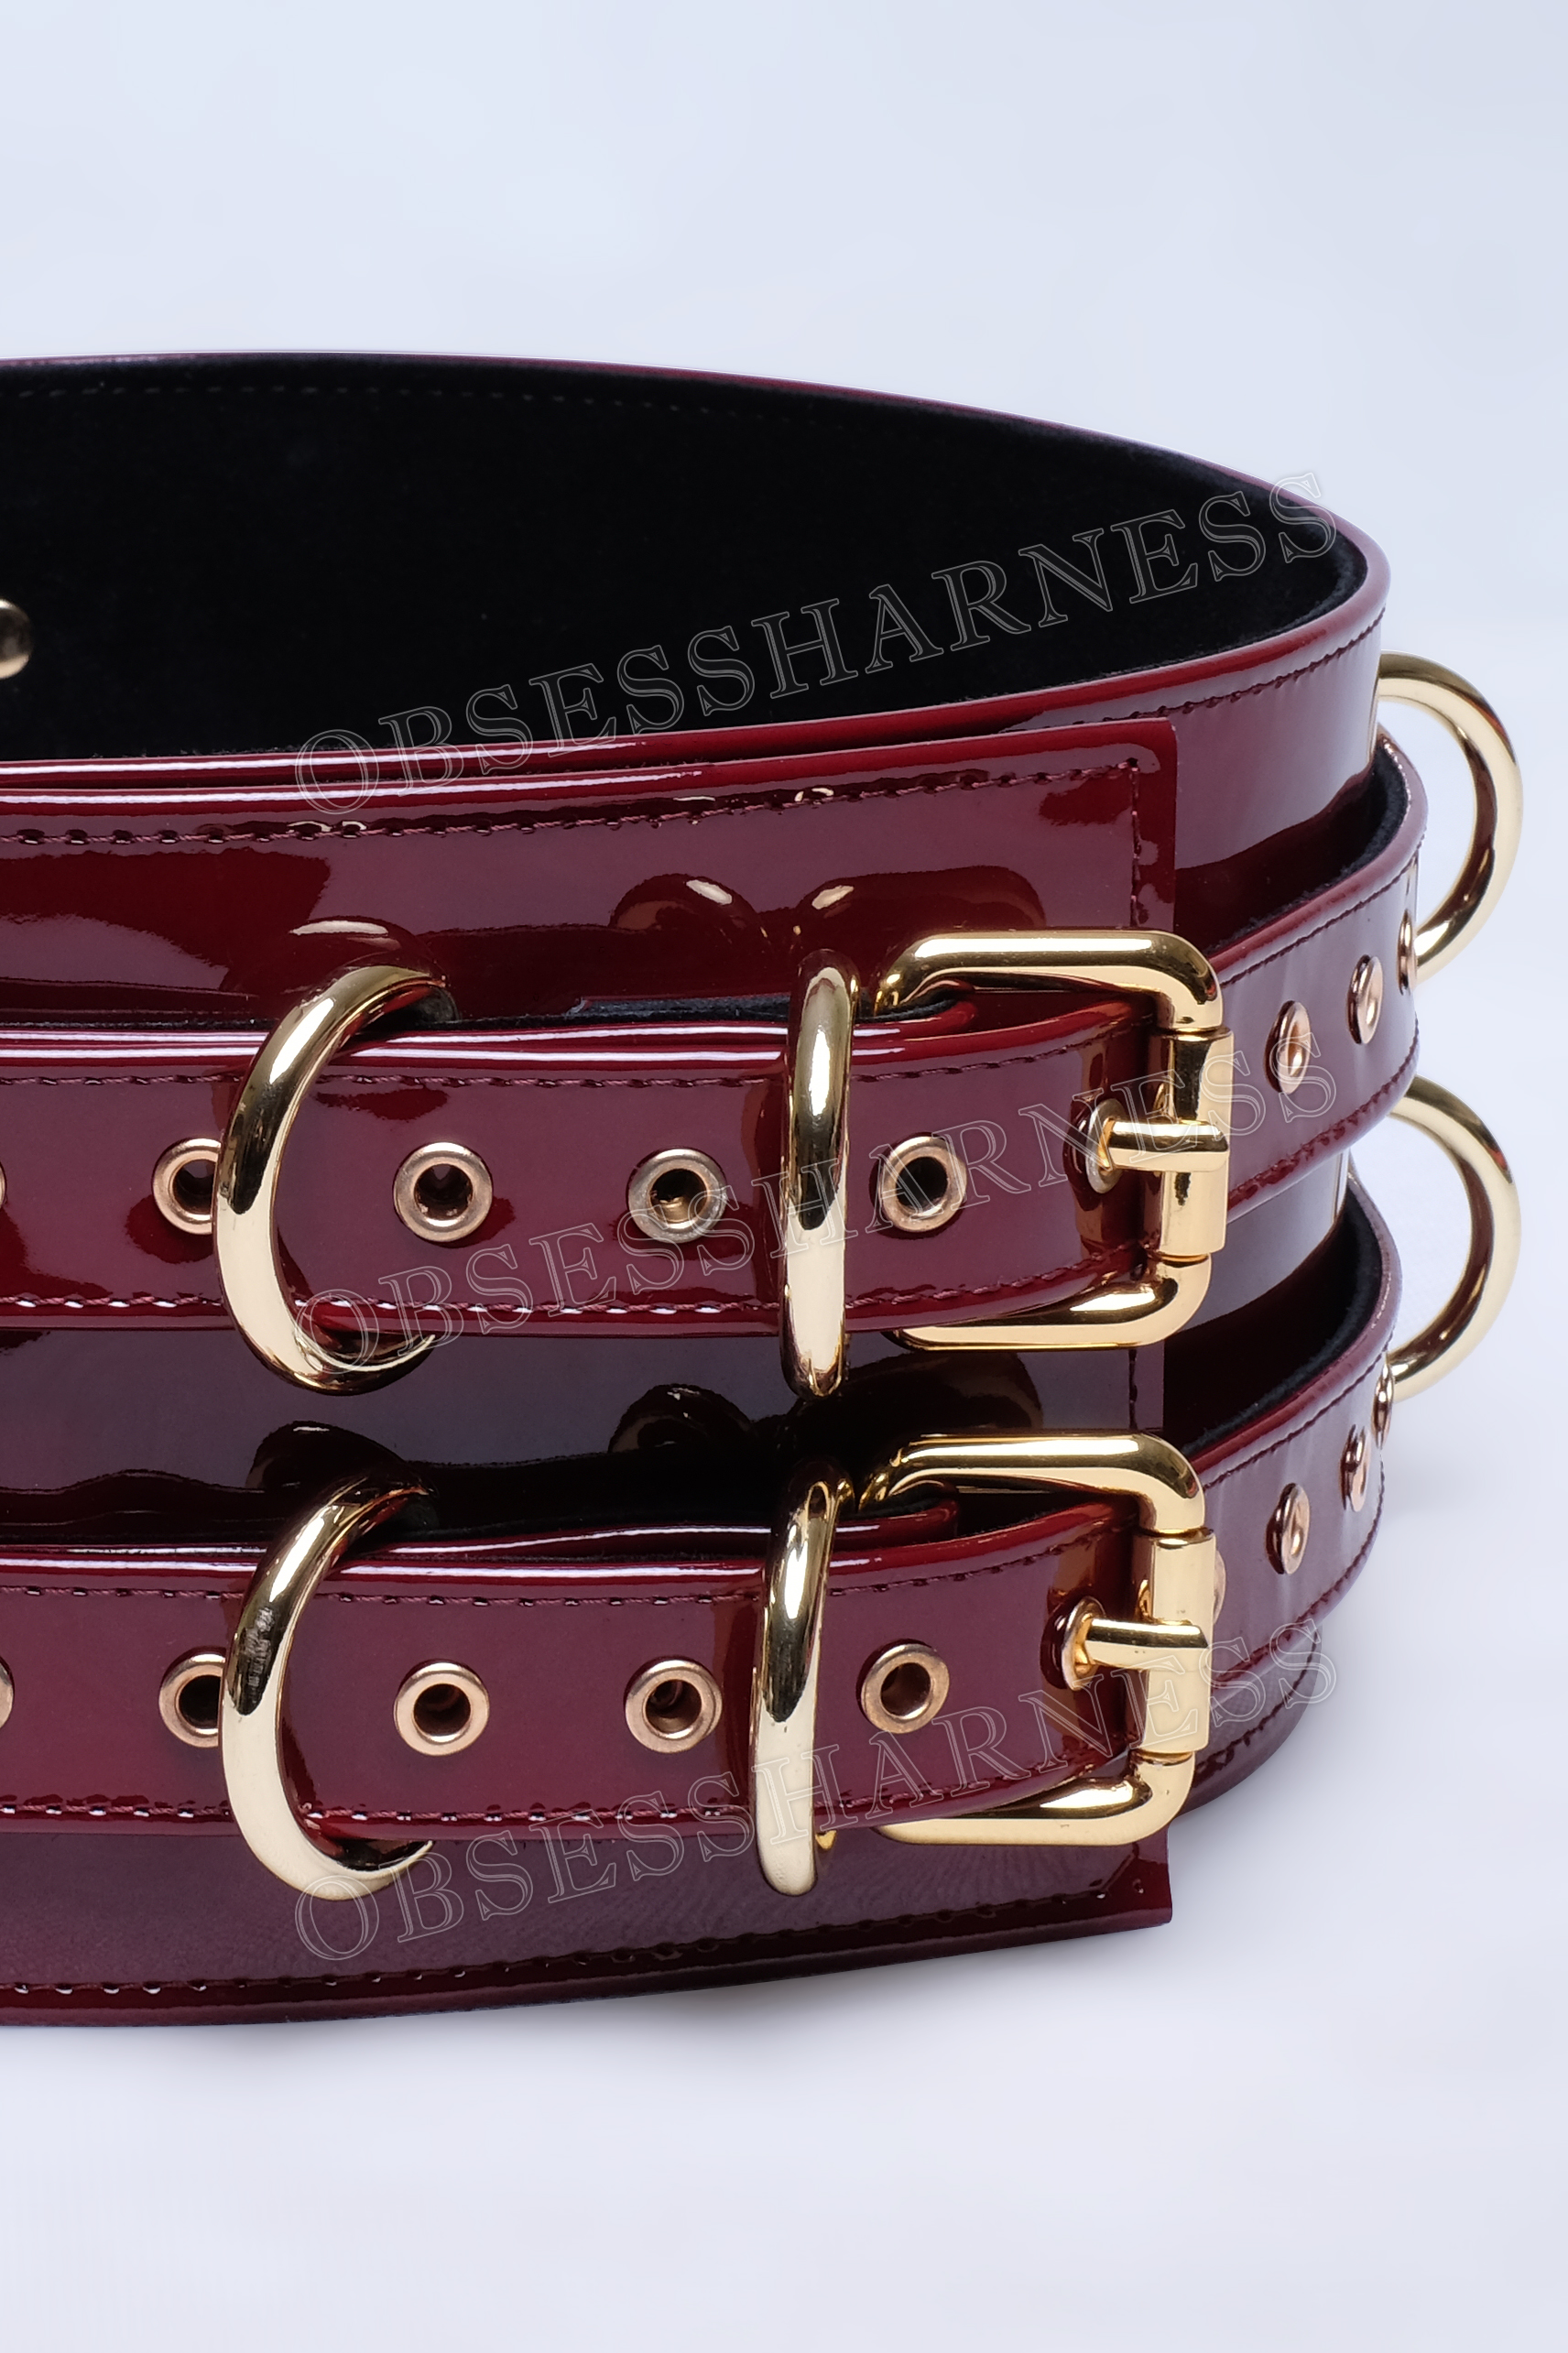 Luxury bondage Belt harness for BDSM made of patent wine leather with an internal suede layer and two metal fasteners on the belt, a belt with D-rings on the sides and back for attaching restraints to the slave for role-playing games